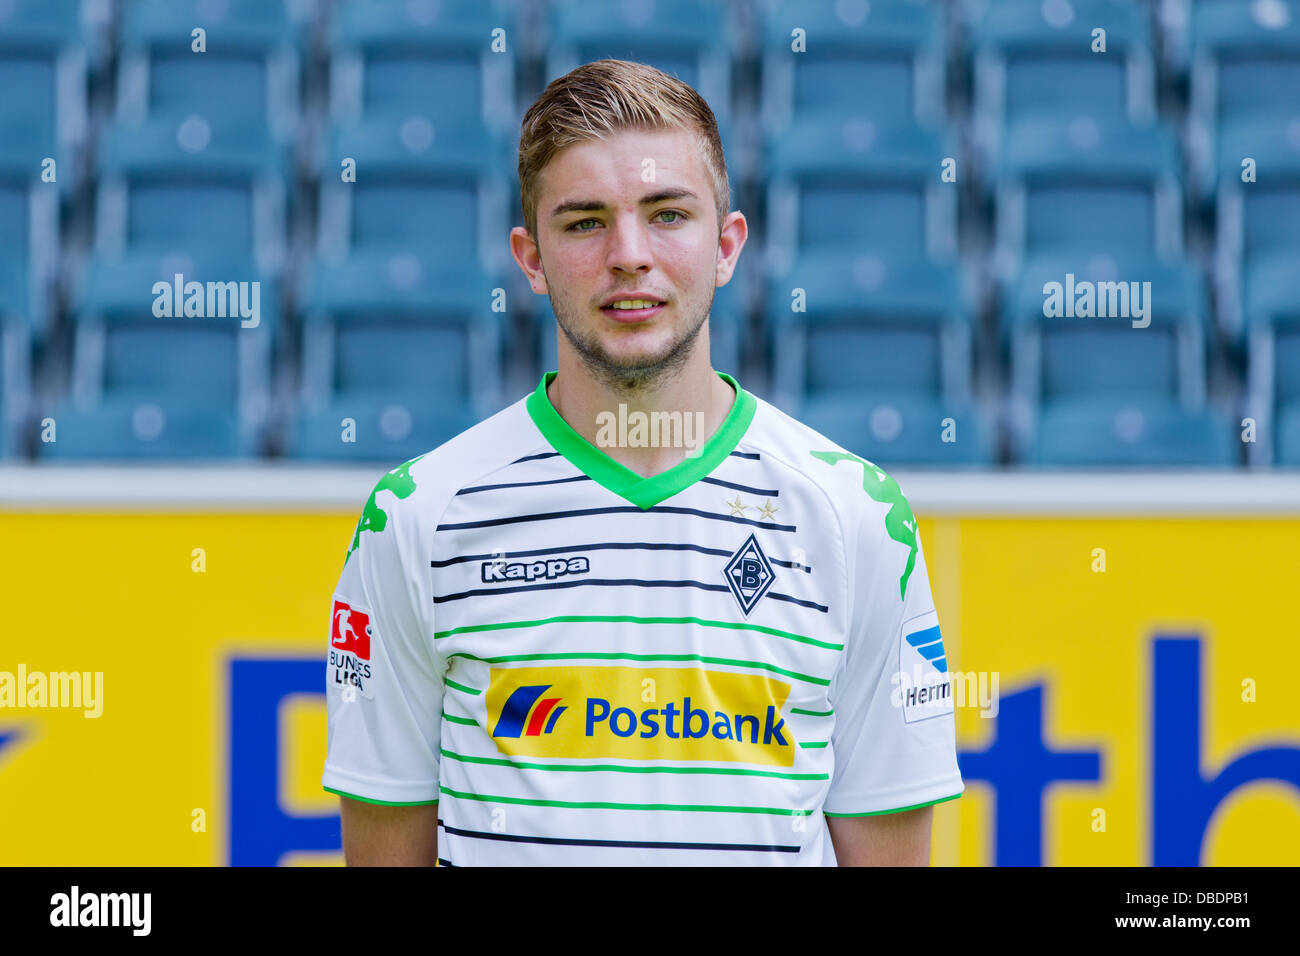 Player Christoph Kramer of German Bundesliga club Borussia Mönchengladbach during the official photocall for the season 2013-14 on the 9th of July in 2013 in the Borussia-Park in Monchengladbach (North Rhine-Westphalia. Stock Photo